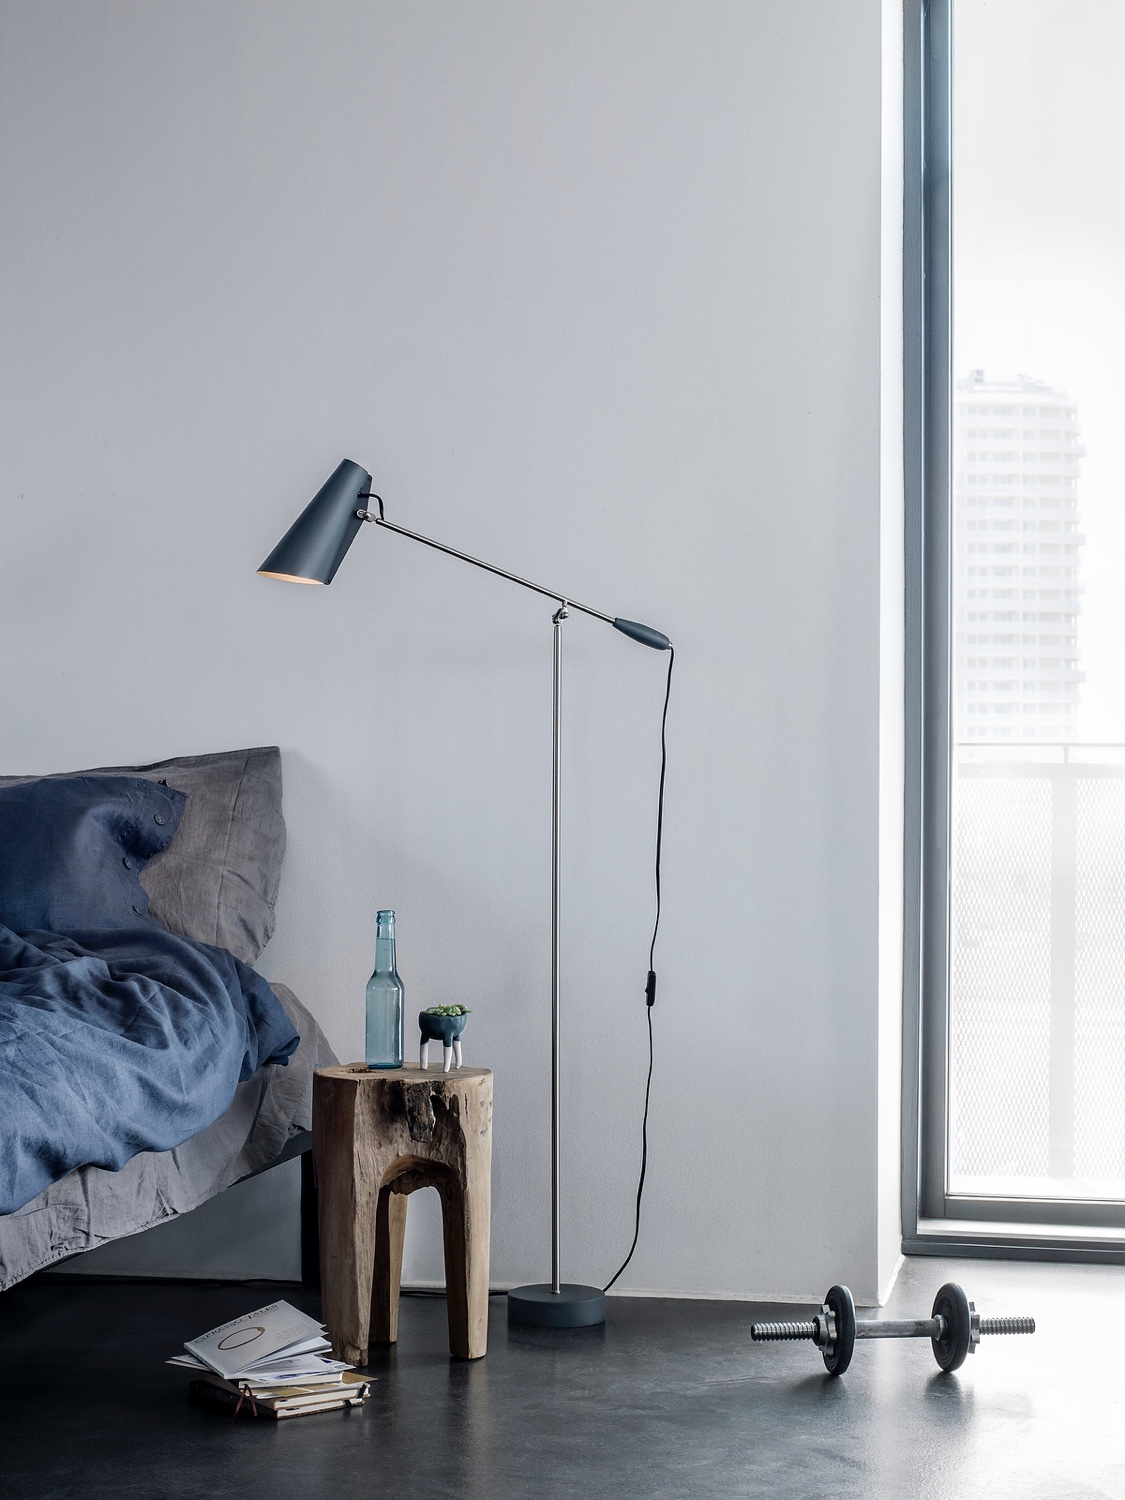 Designed in 1952 by Birger Dahl (and relaunched by Northern Lighting in 2013), Birdy (pictured in grey metallic) is a delightful modernist table lamp.